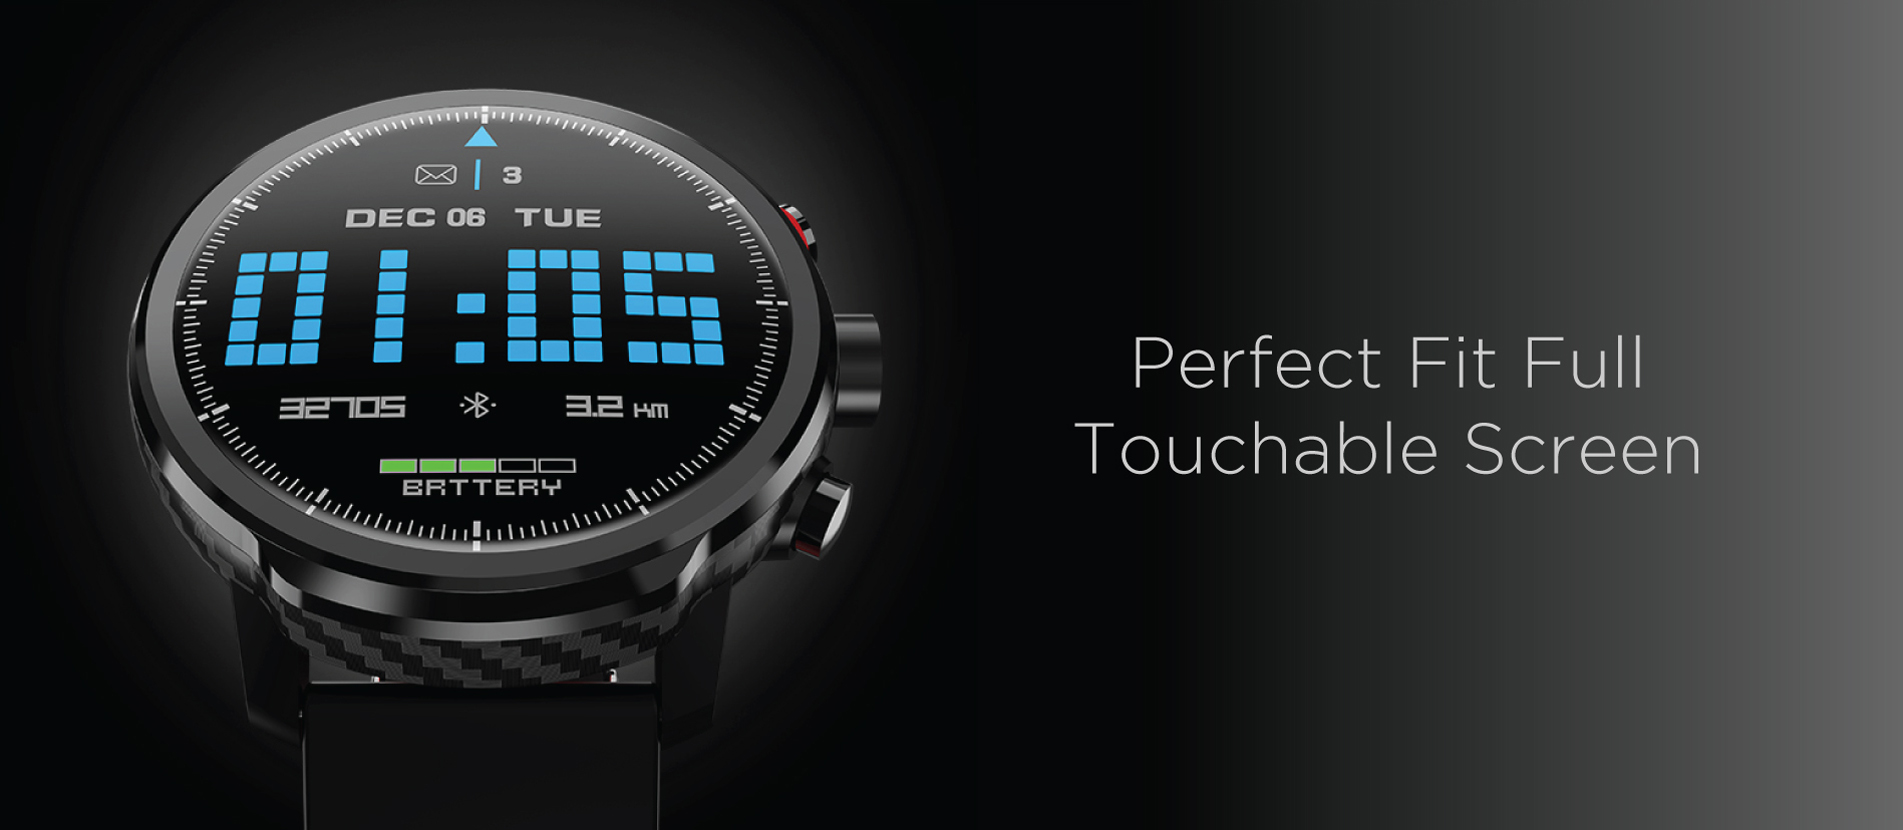 Buy Screen Touchable Smart Watches online | mPhone Electronics